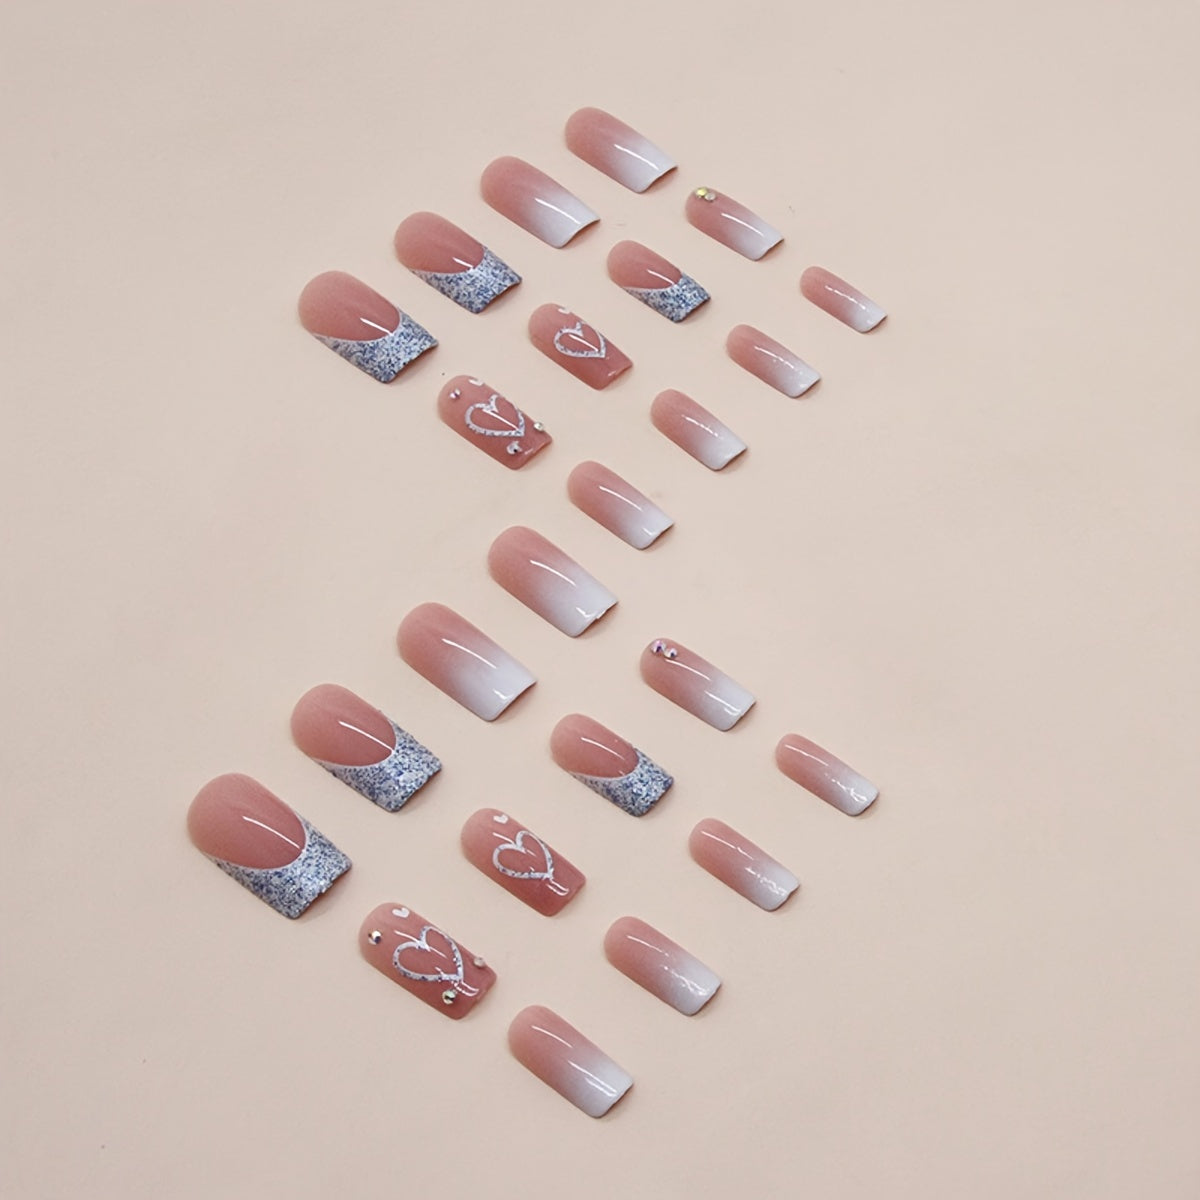 24pcs Glossy Pinkish White Gradient Press On Nails with Glitter Heart Design, Medium Square Fake Nails for Women Girls